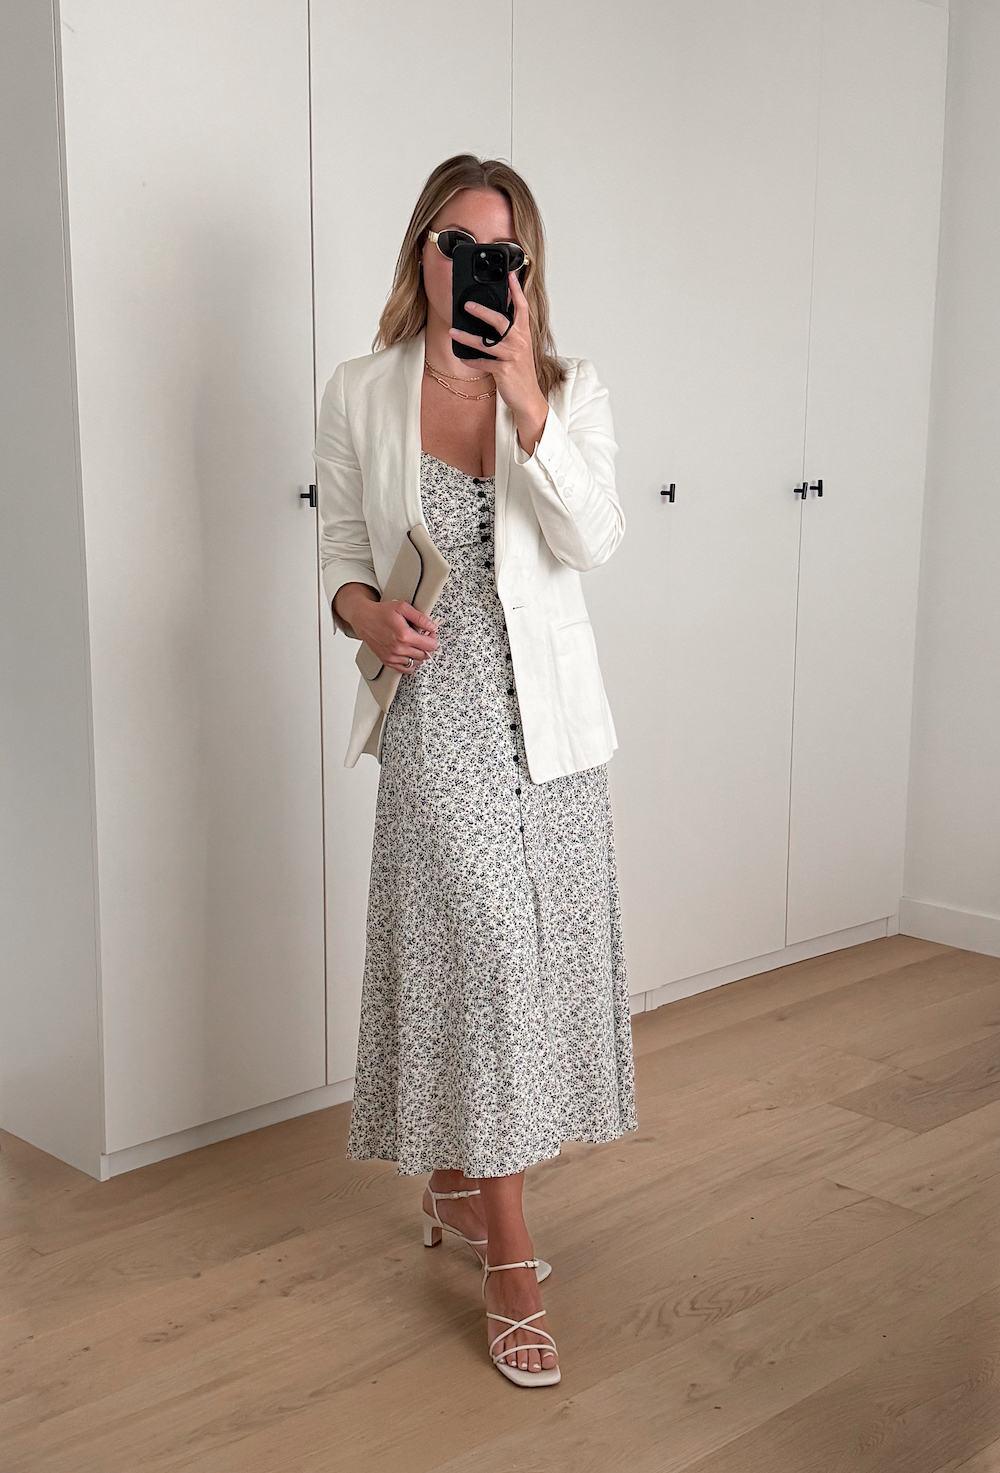 Christal wearing a floral printed sundress with white heeled sandals and a white blazer.